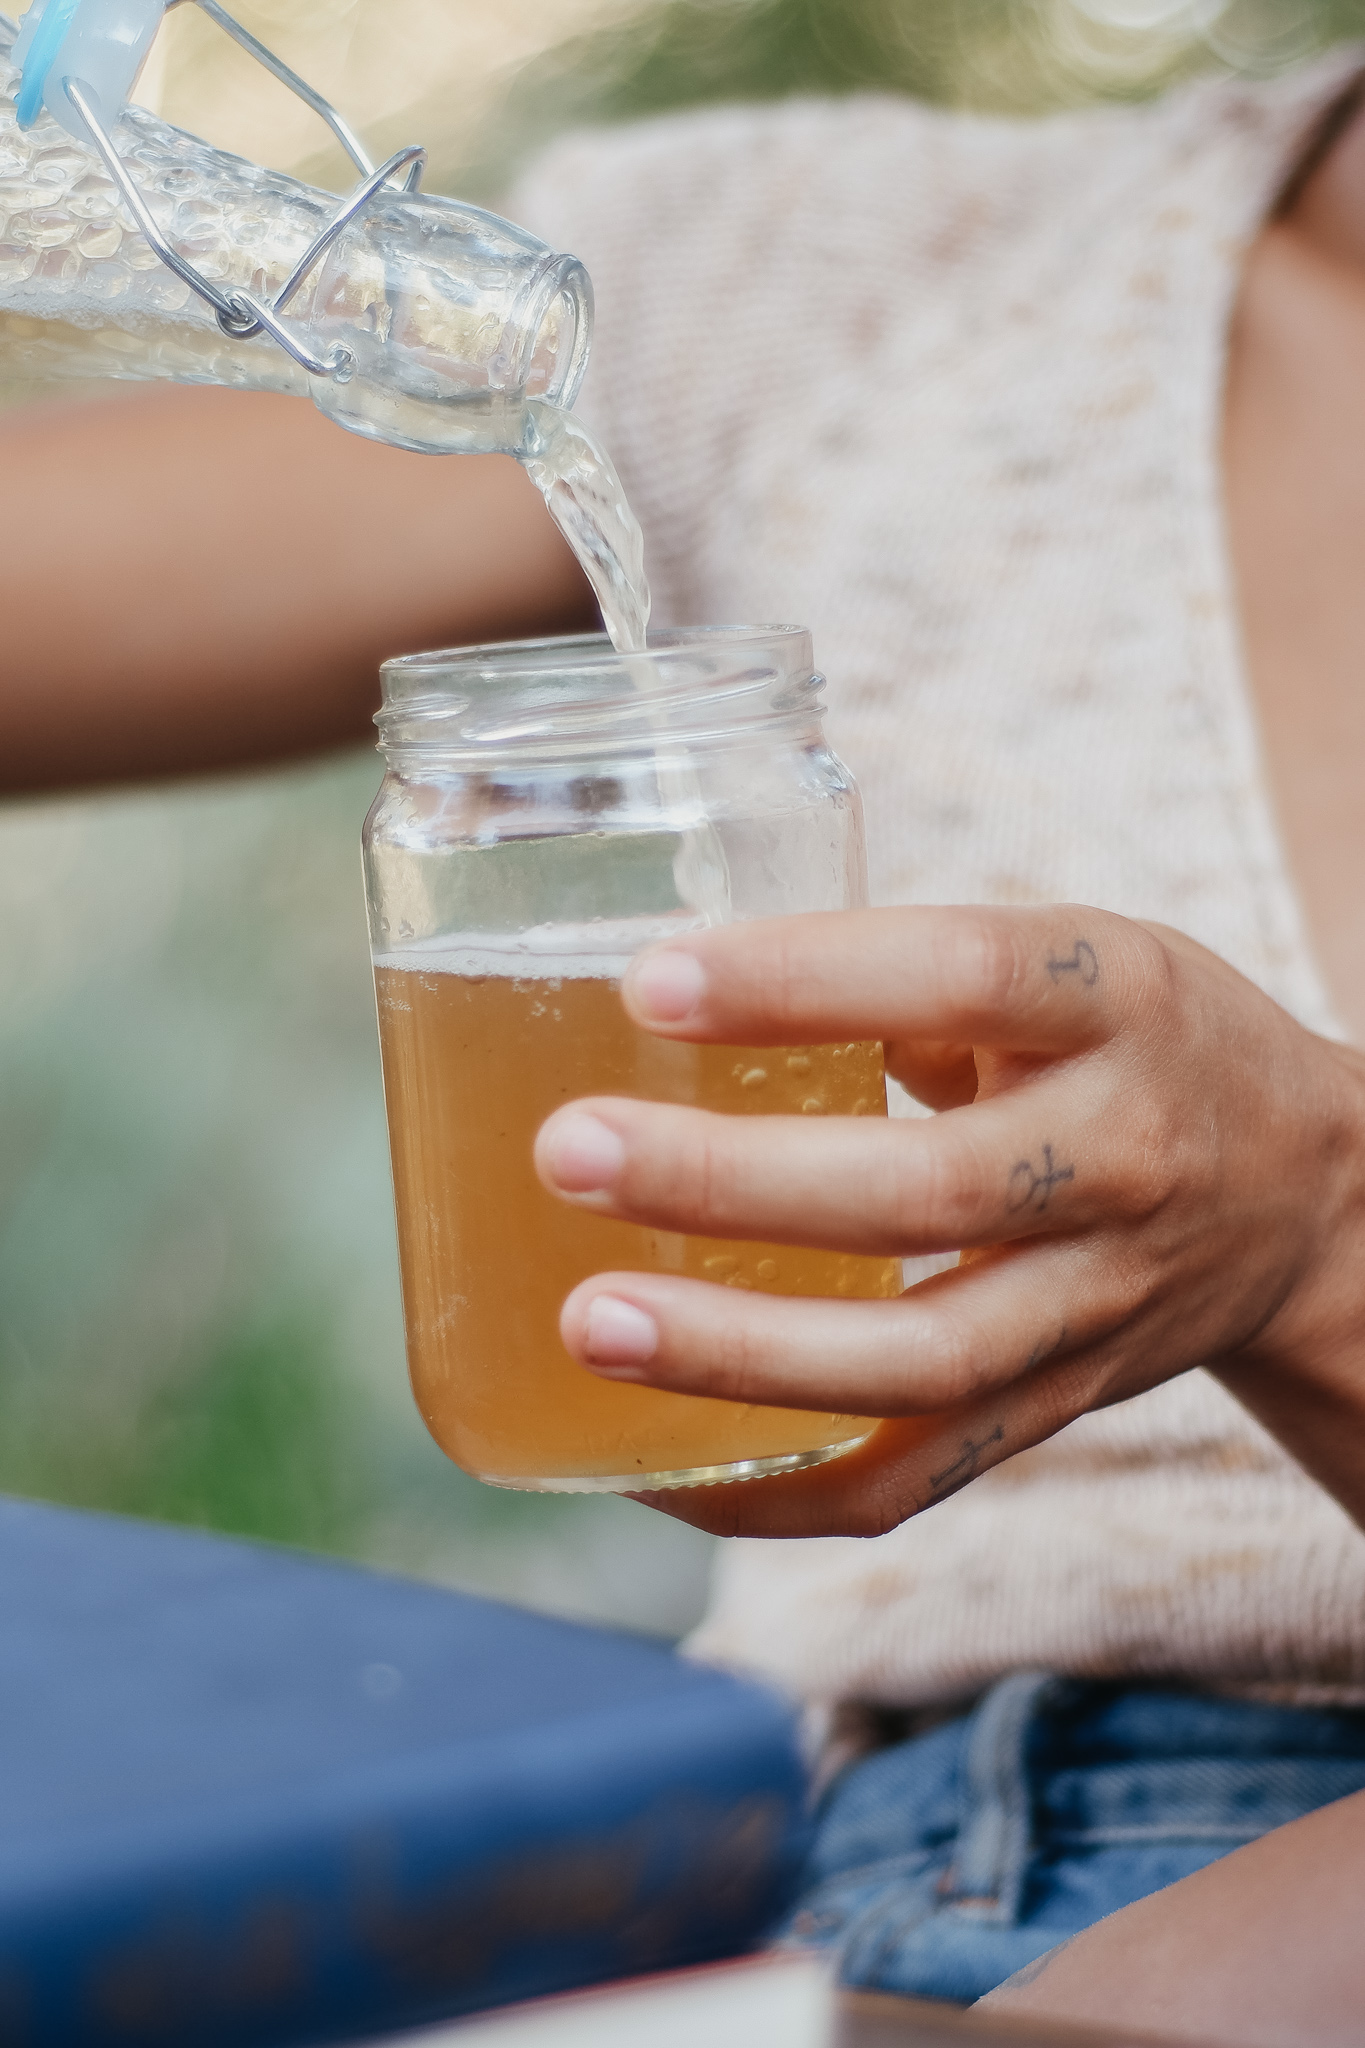 Making Herbal Beer and Fermentations with Botanicals - the Craft of Herbal Fermentation Course